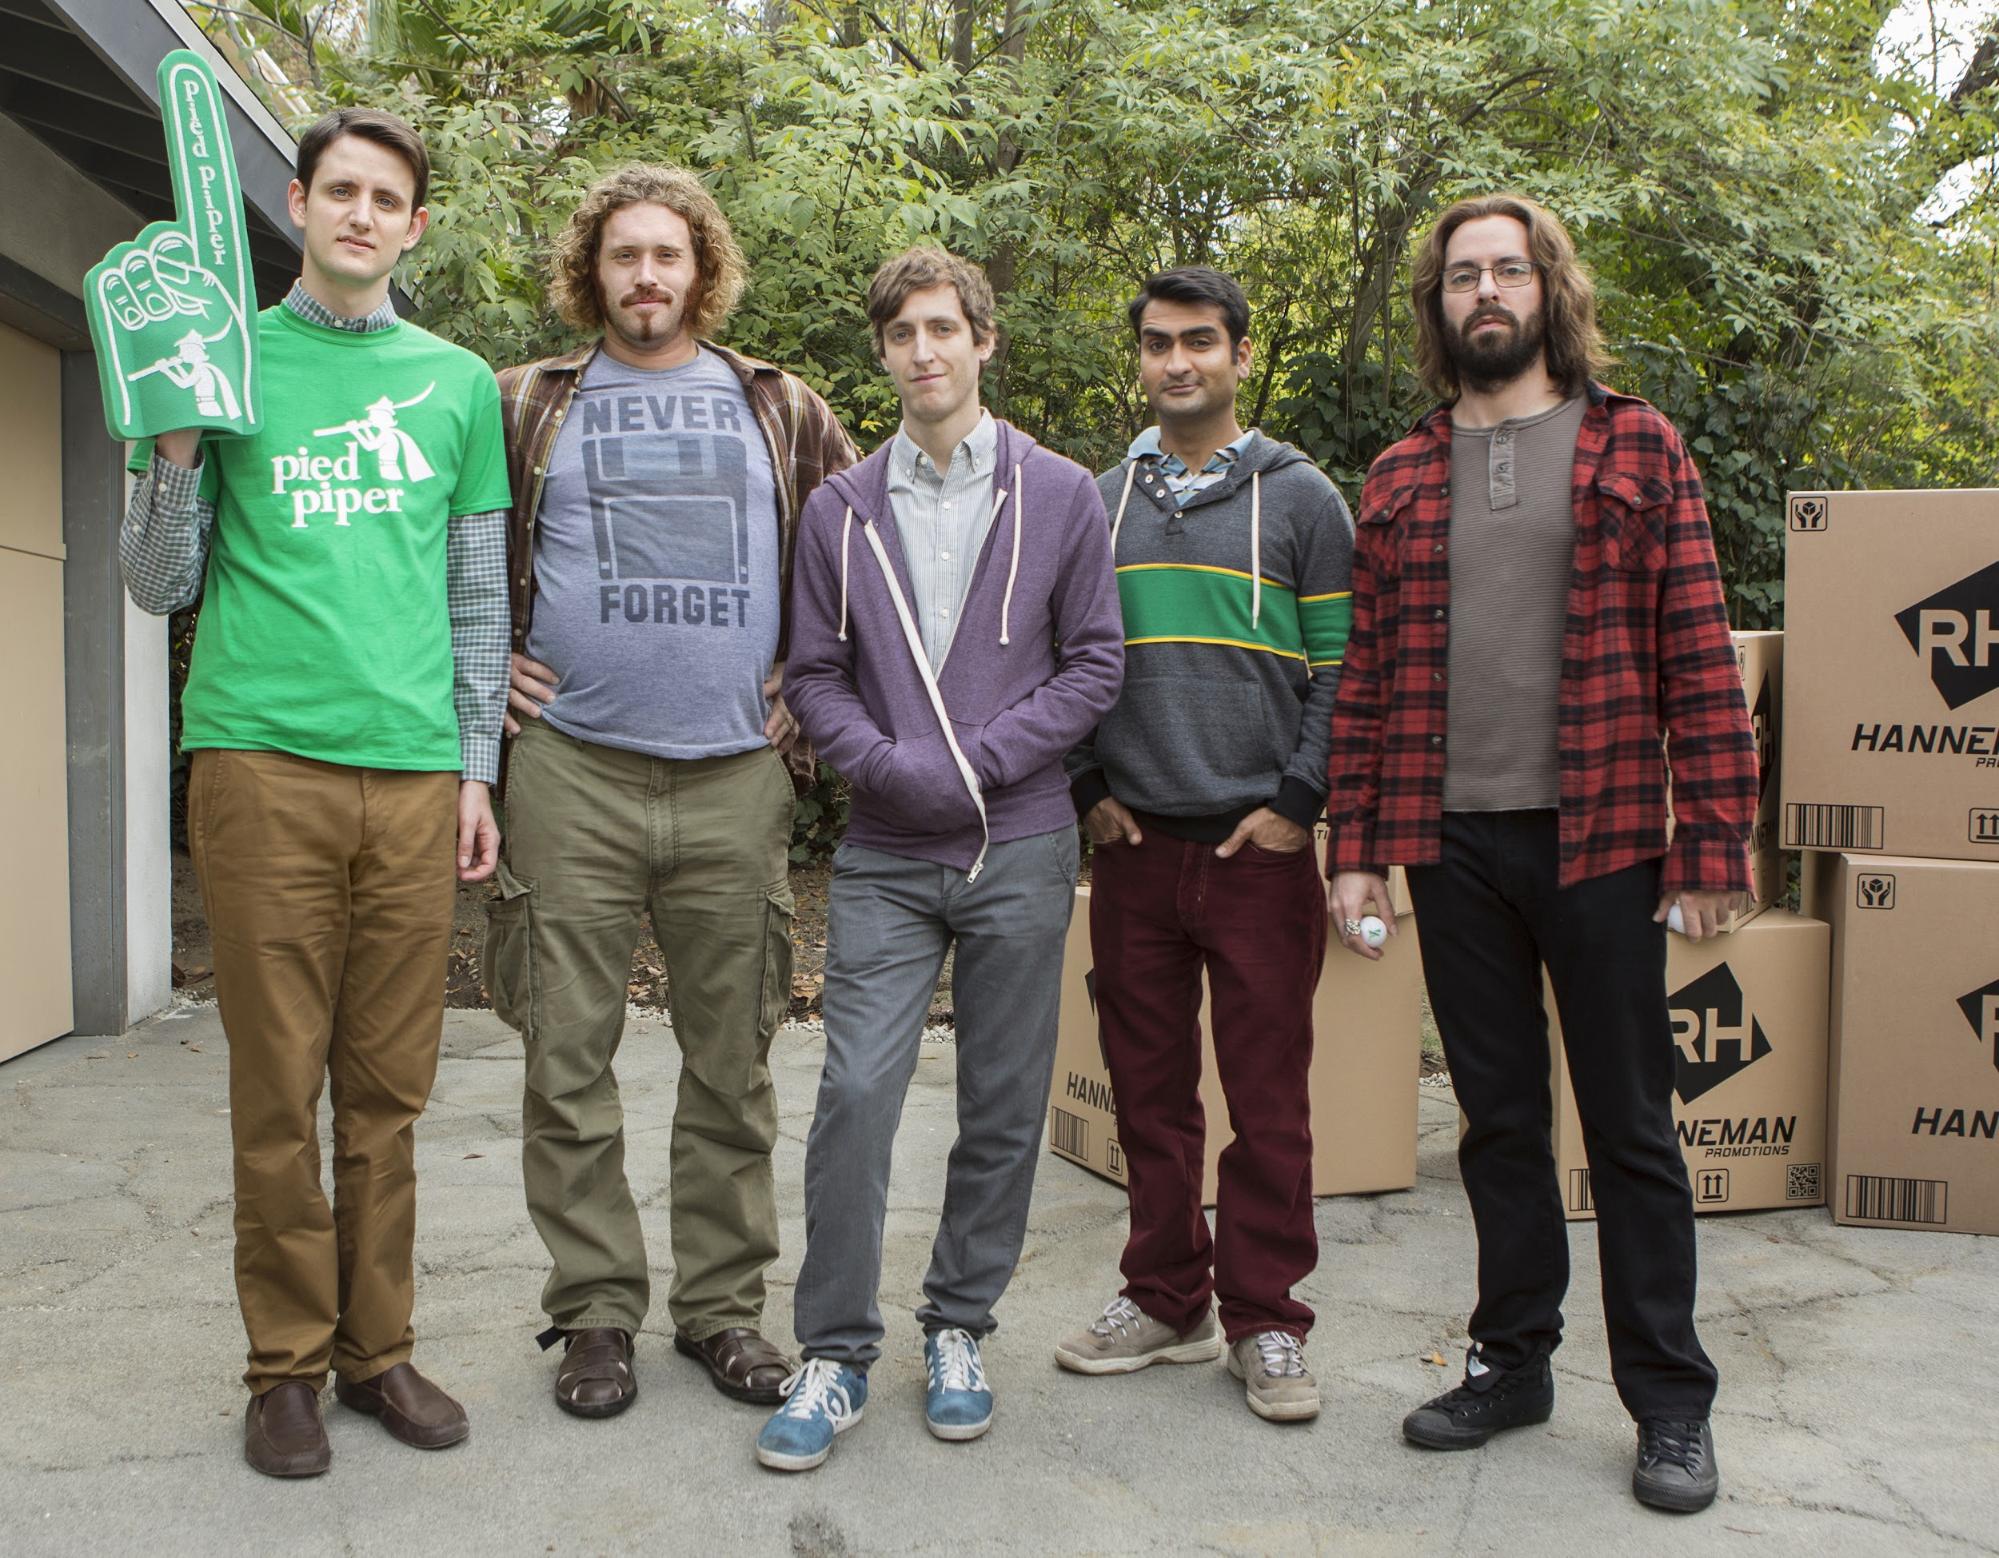 10 Lessons Digital Marketers Can Learn from HBO’s Silicon Valley